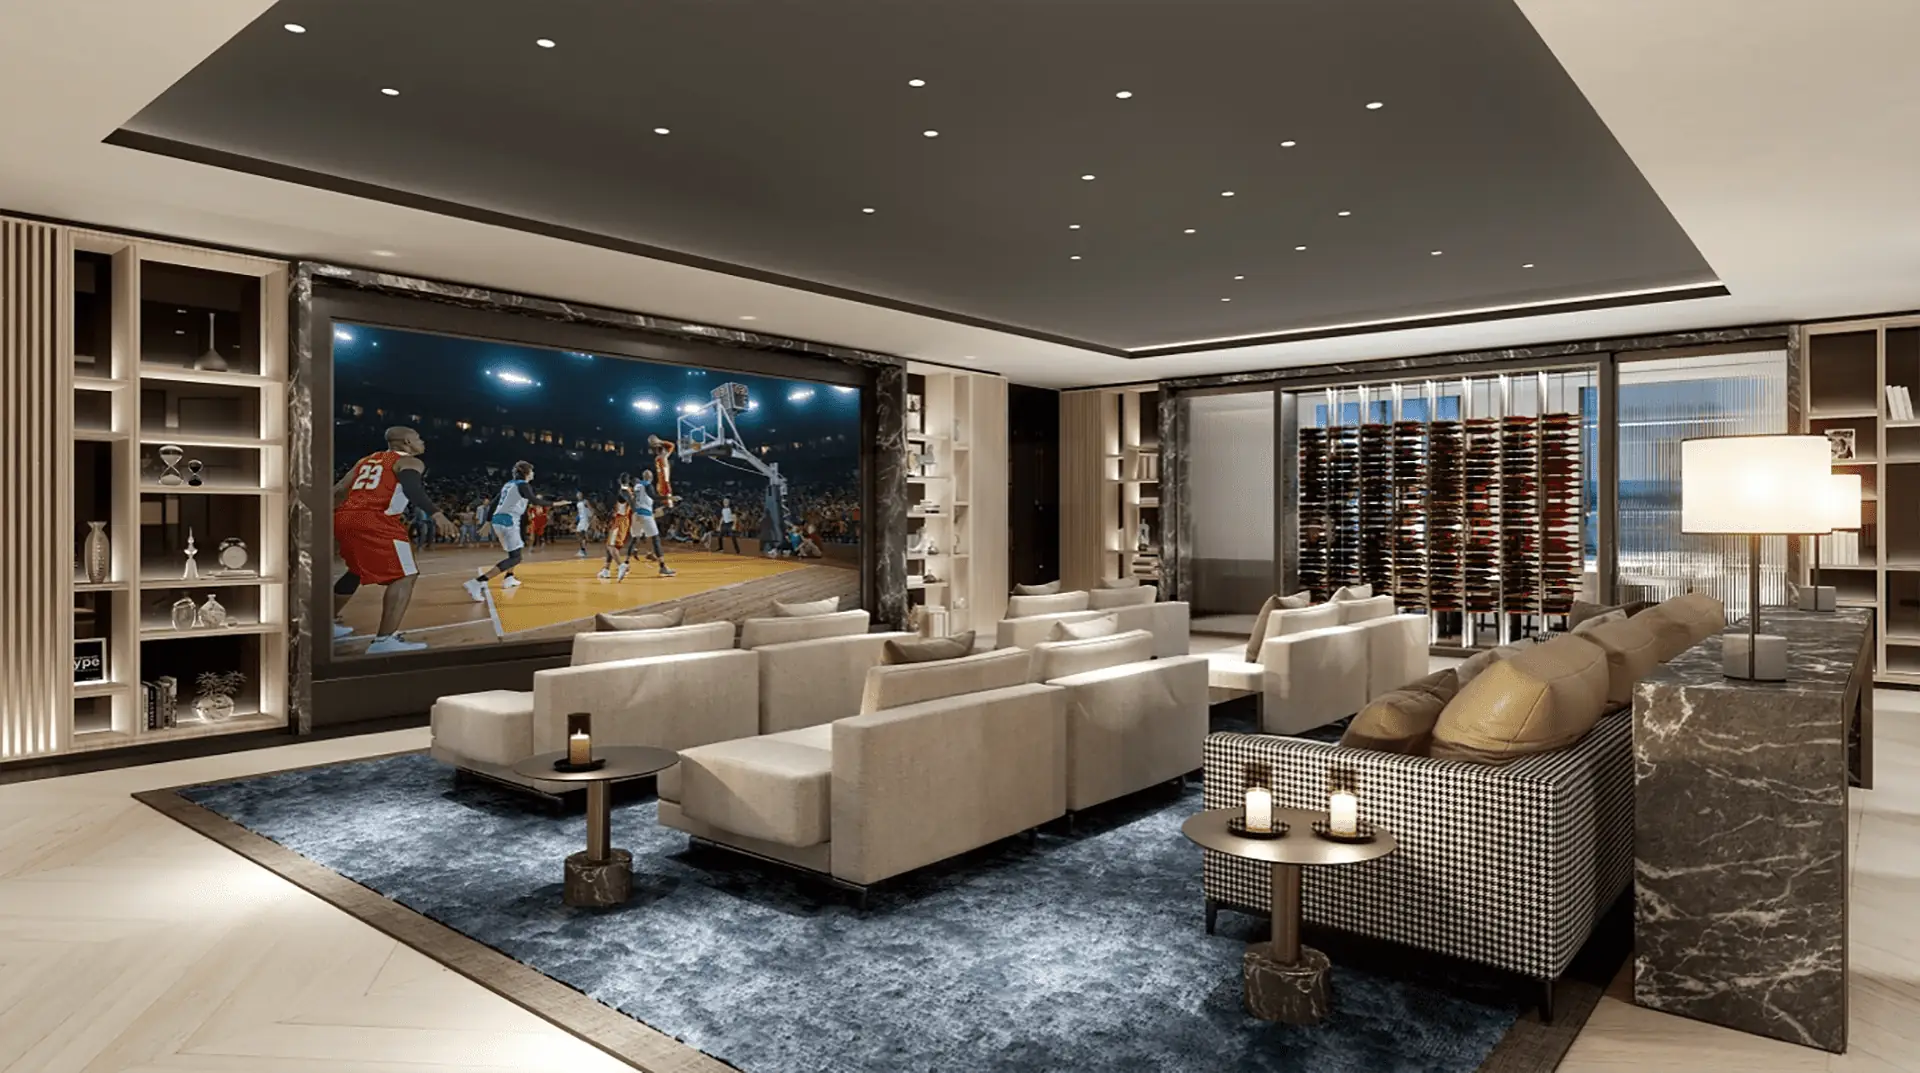 a rendering of a large in-home theater with reclining seats, blue carpeting, and shelves of media. 